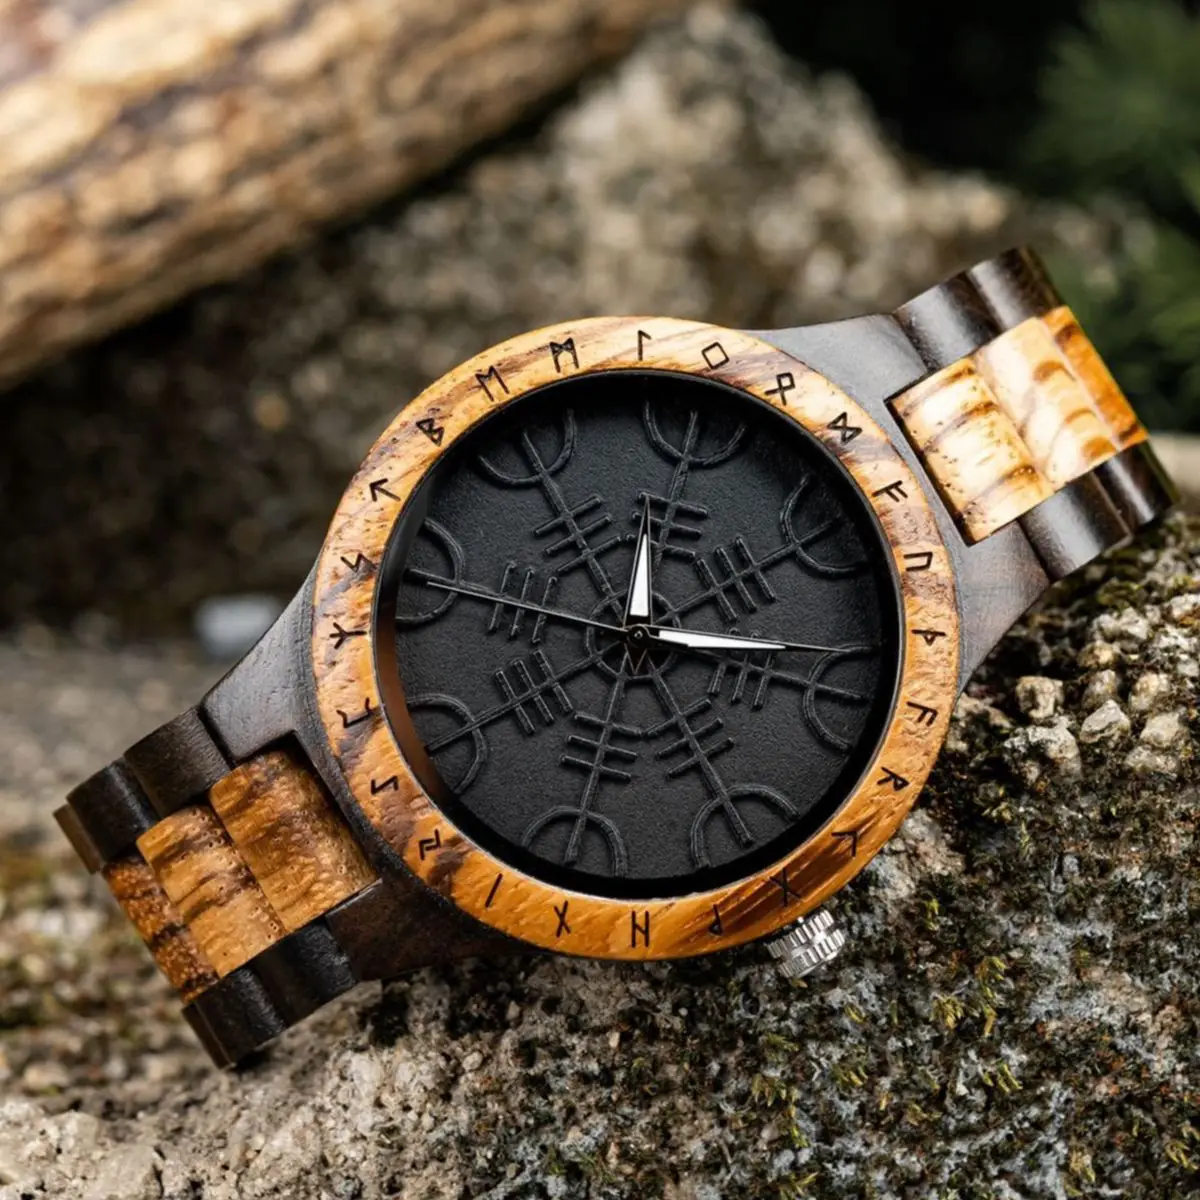 BOBO BIRD Wood Watches Relogio Masculino Watch for Men Viking Warriors Symbol Relojes Para Hombre часы мужские Logo Custom oirlv wooden watch stand for watch display watches organizer t frame wooden jewelry display stand solid wood tshape watch holder